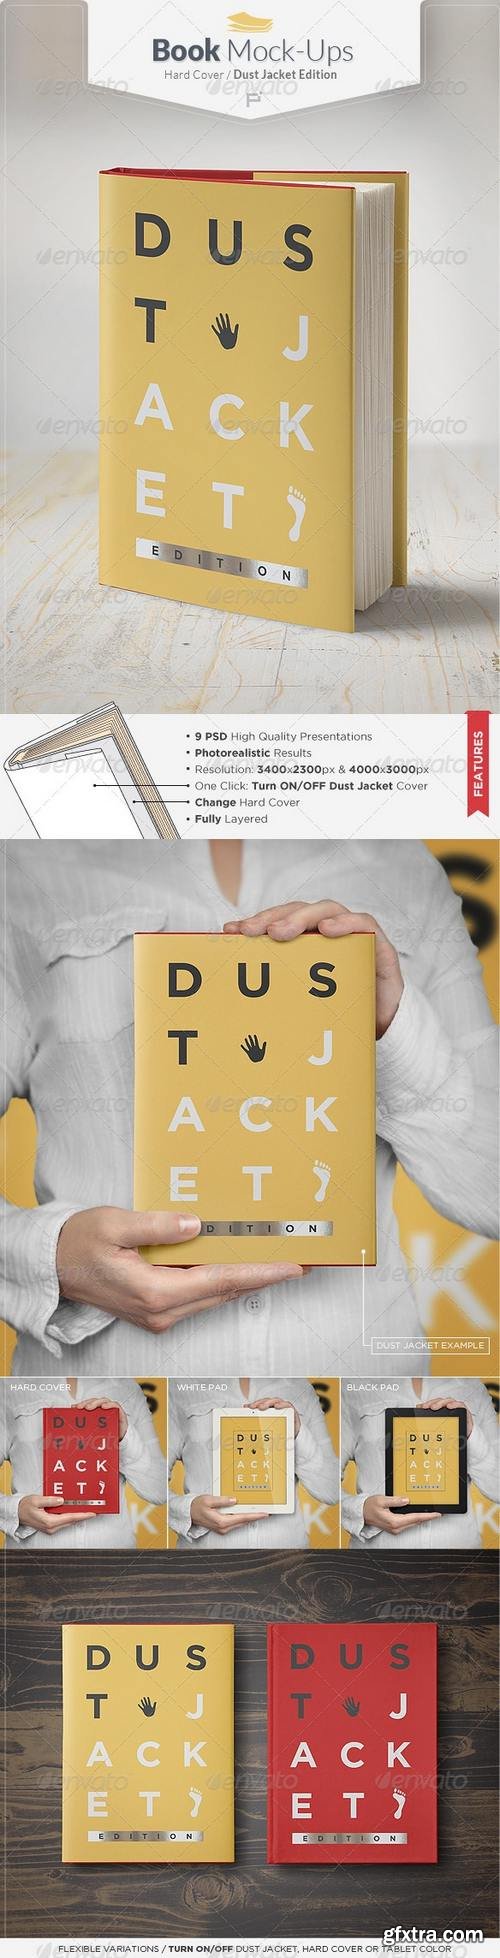 GraphicRiver - Book Mock-Up - Dust Jacket Edition 7735188